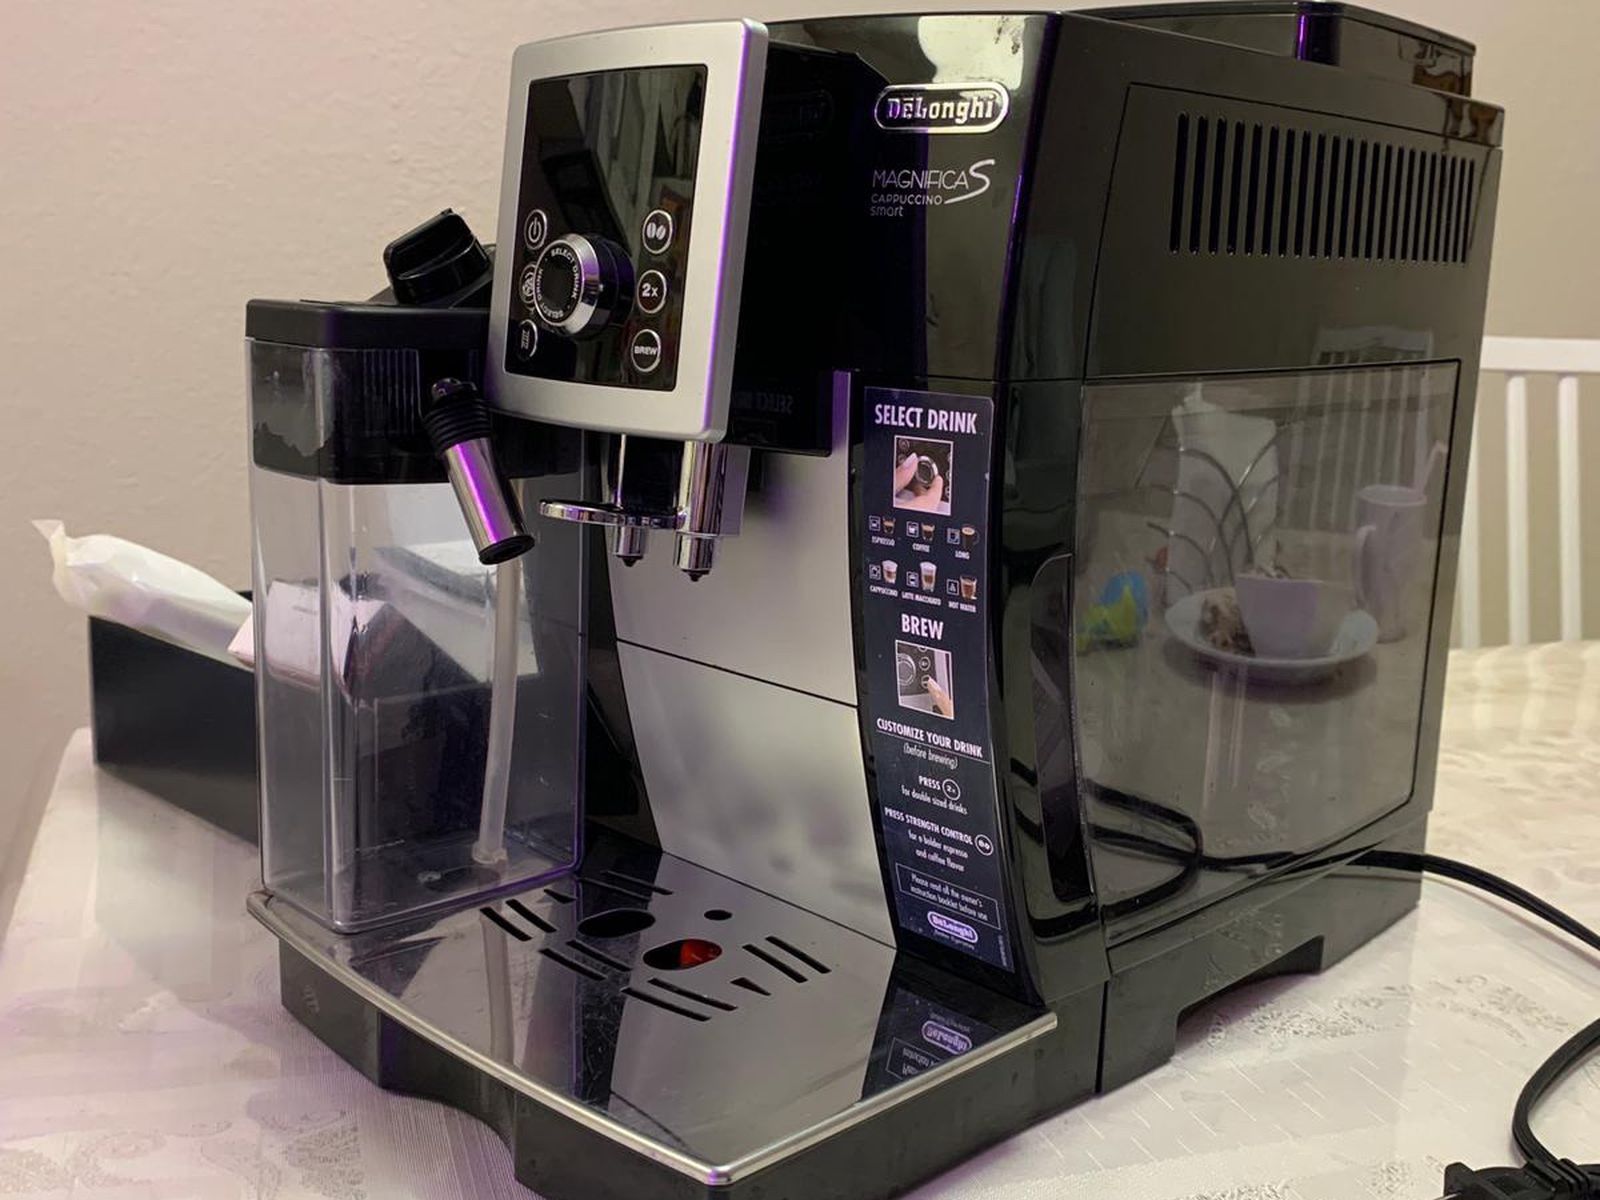 De'Longhi TrueBrew Automatic Coffee Maker with Bean Extract Technology for  Sale in Plant City, FL - OfferUp